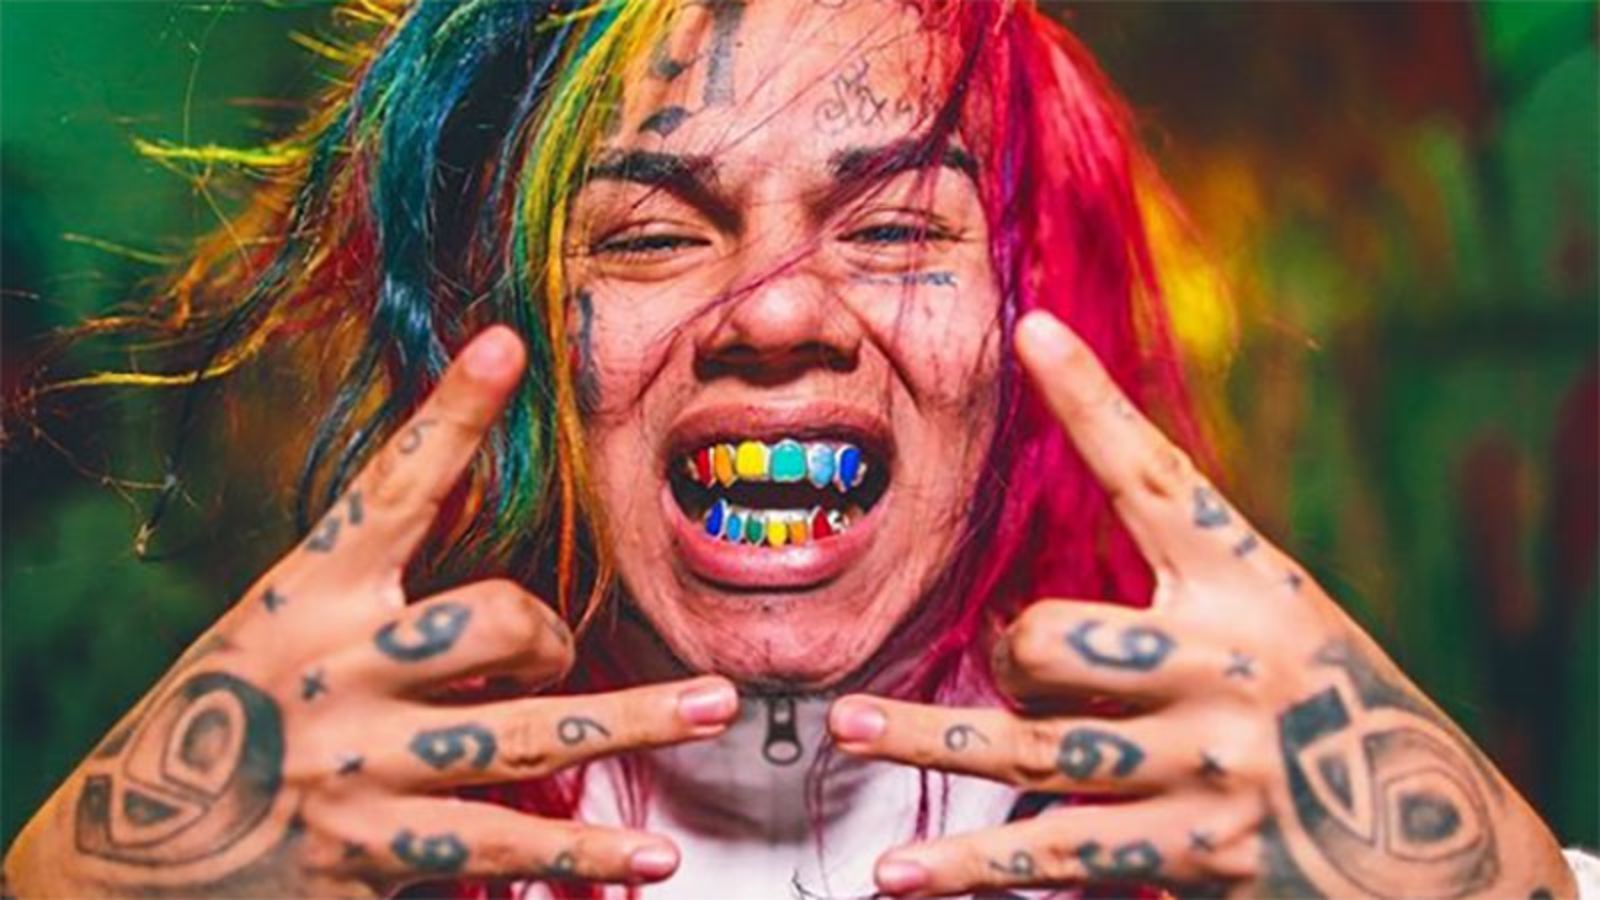 BREAKING NEWS Rapper Tekashi Has Died Of Apparent LIGMA